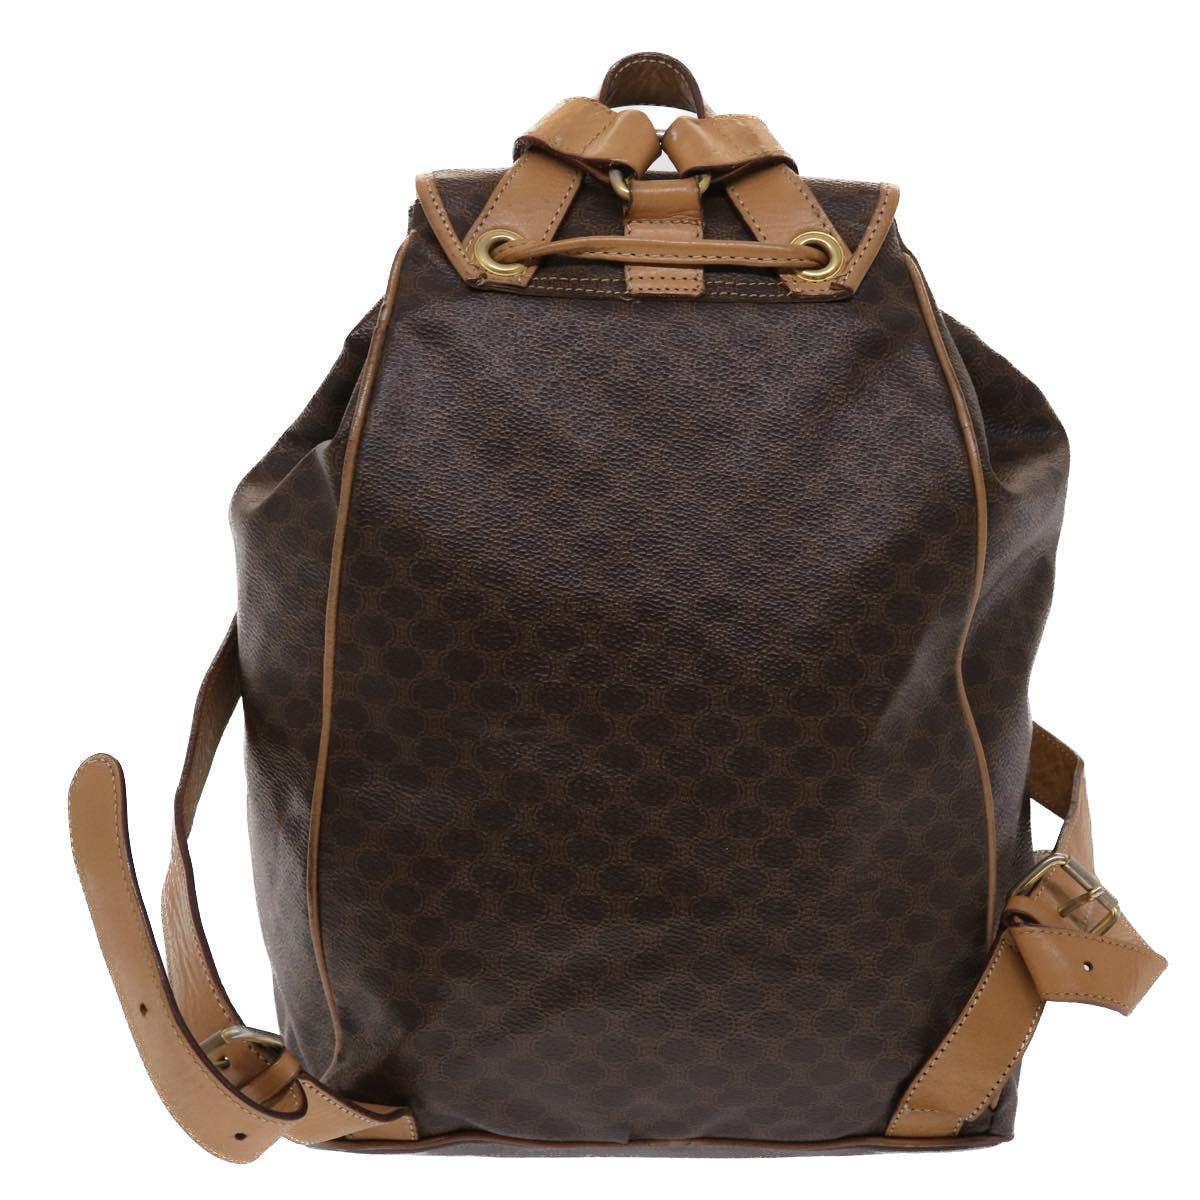 CELINE Macadam Canvas Backpack PVC Leather Brown Auth bs6391